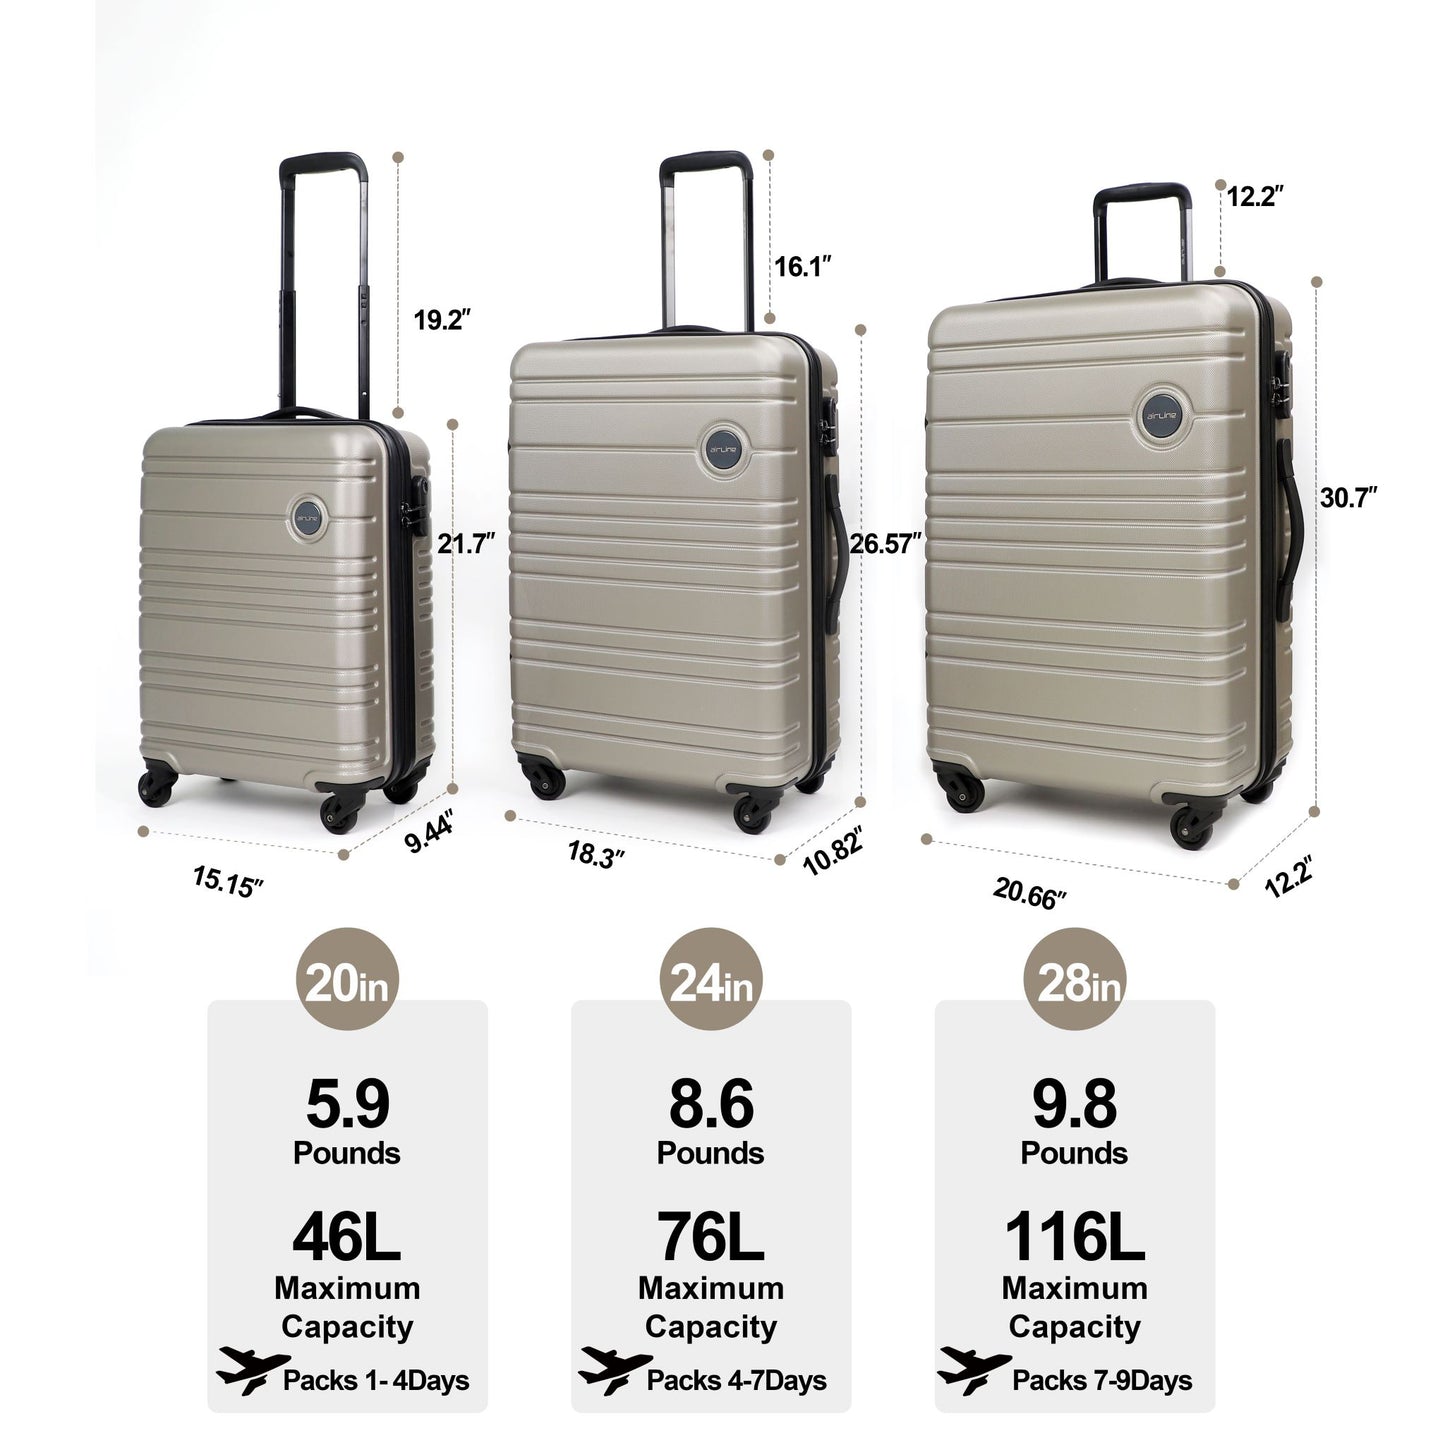 Airline_Luggage_Sets_3pieces_Chocolate_Size_N12721004